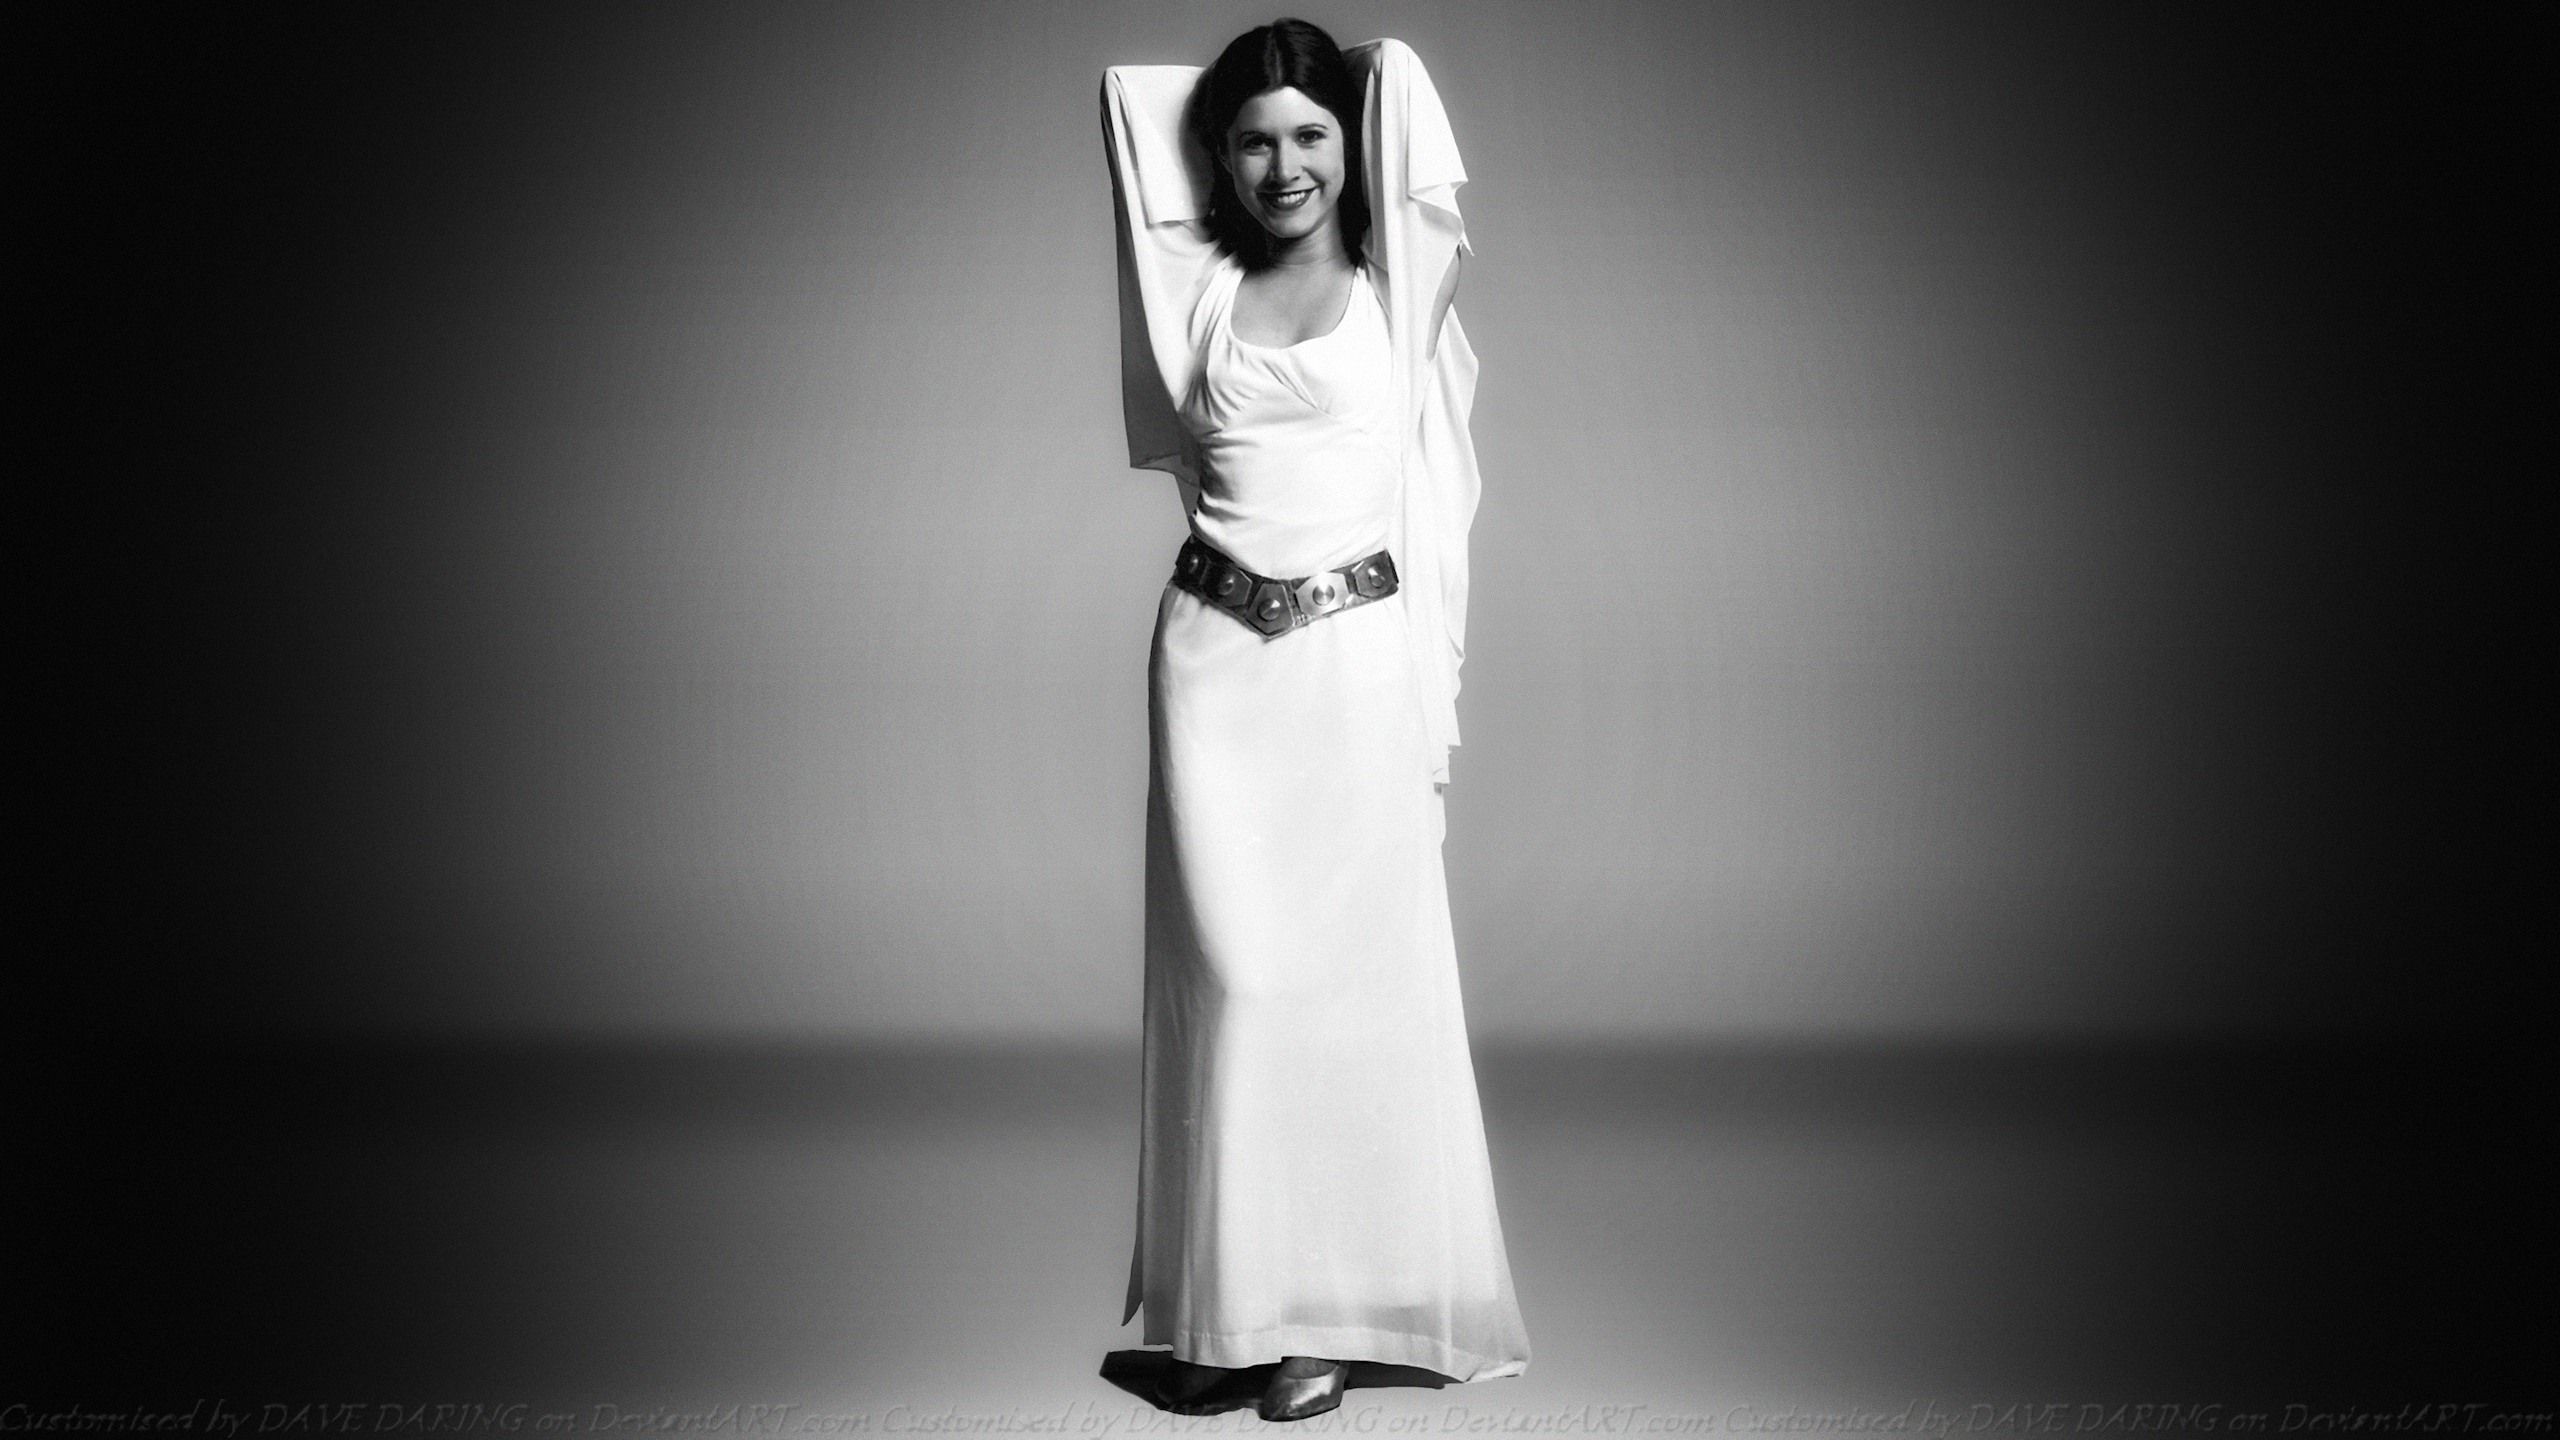 Carrie Fisher Star Wars Women Monochrome Arms Up Princess Leia Smiling Actress Deceased 2560x1440